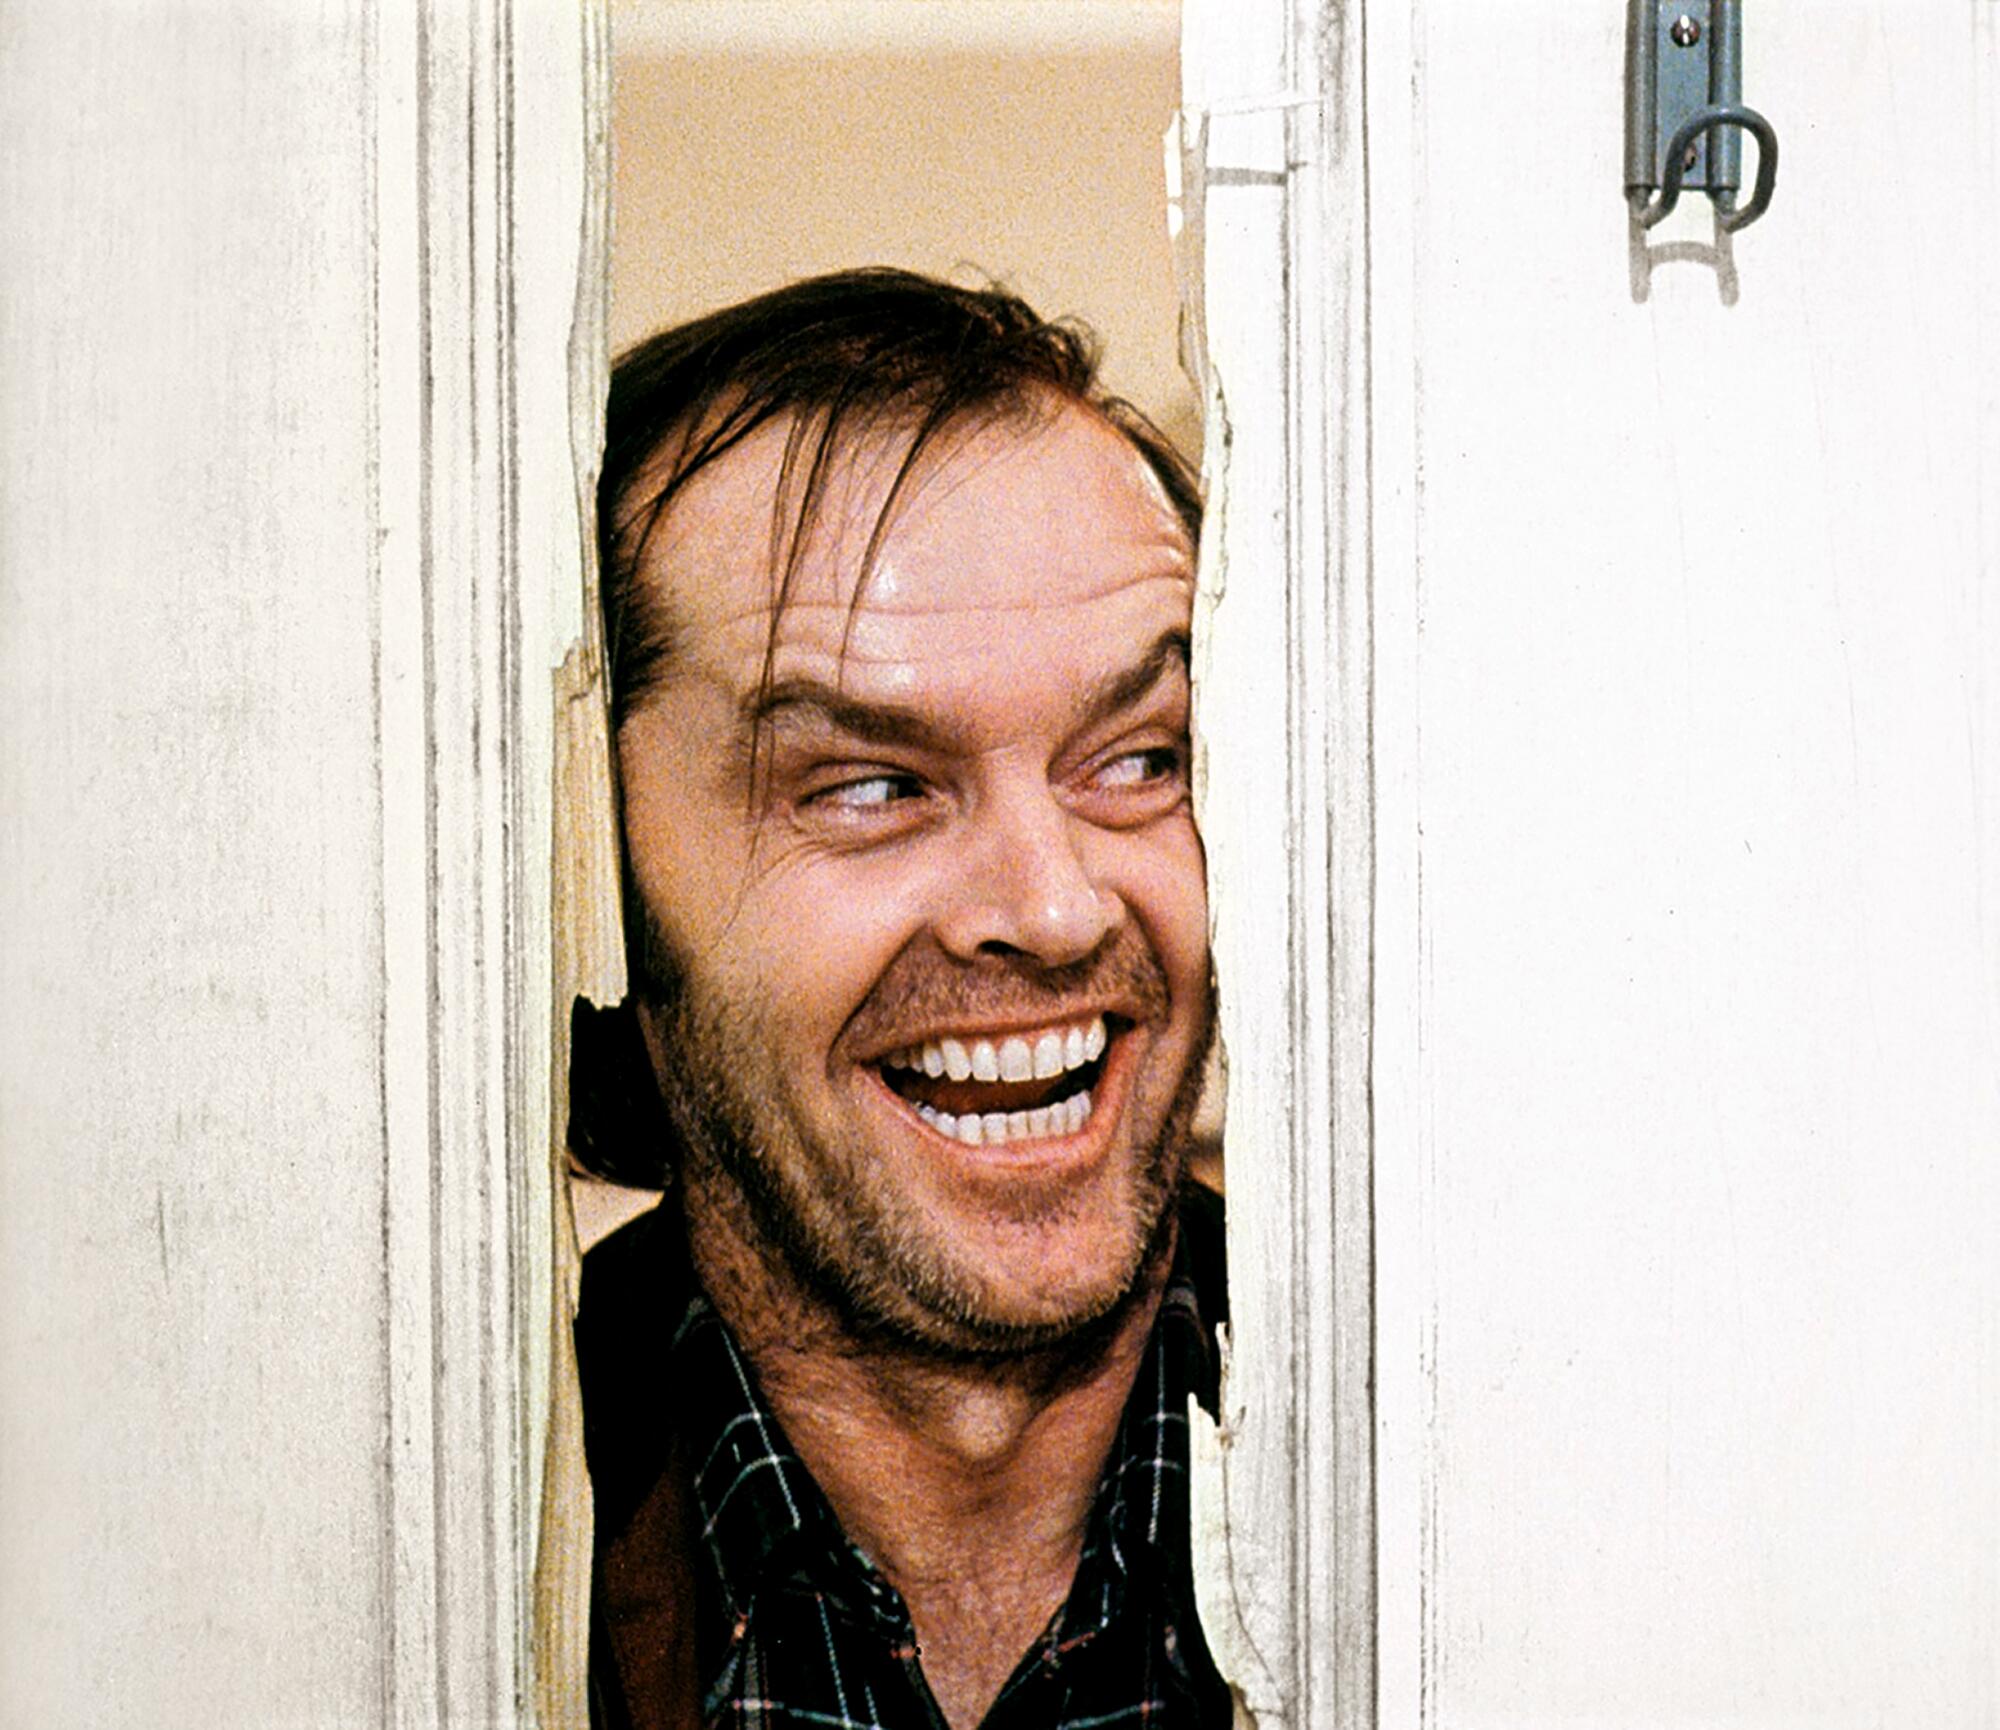 Book is a new treasure trove for obsessive fans of 'The Shining